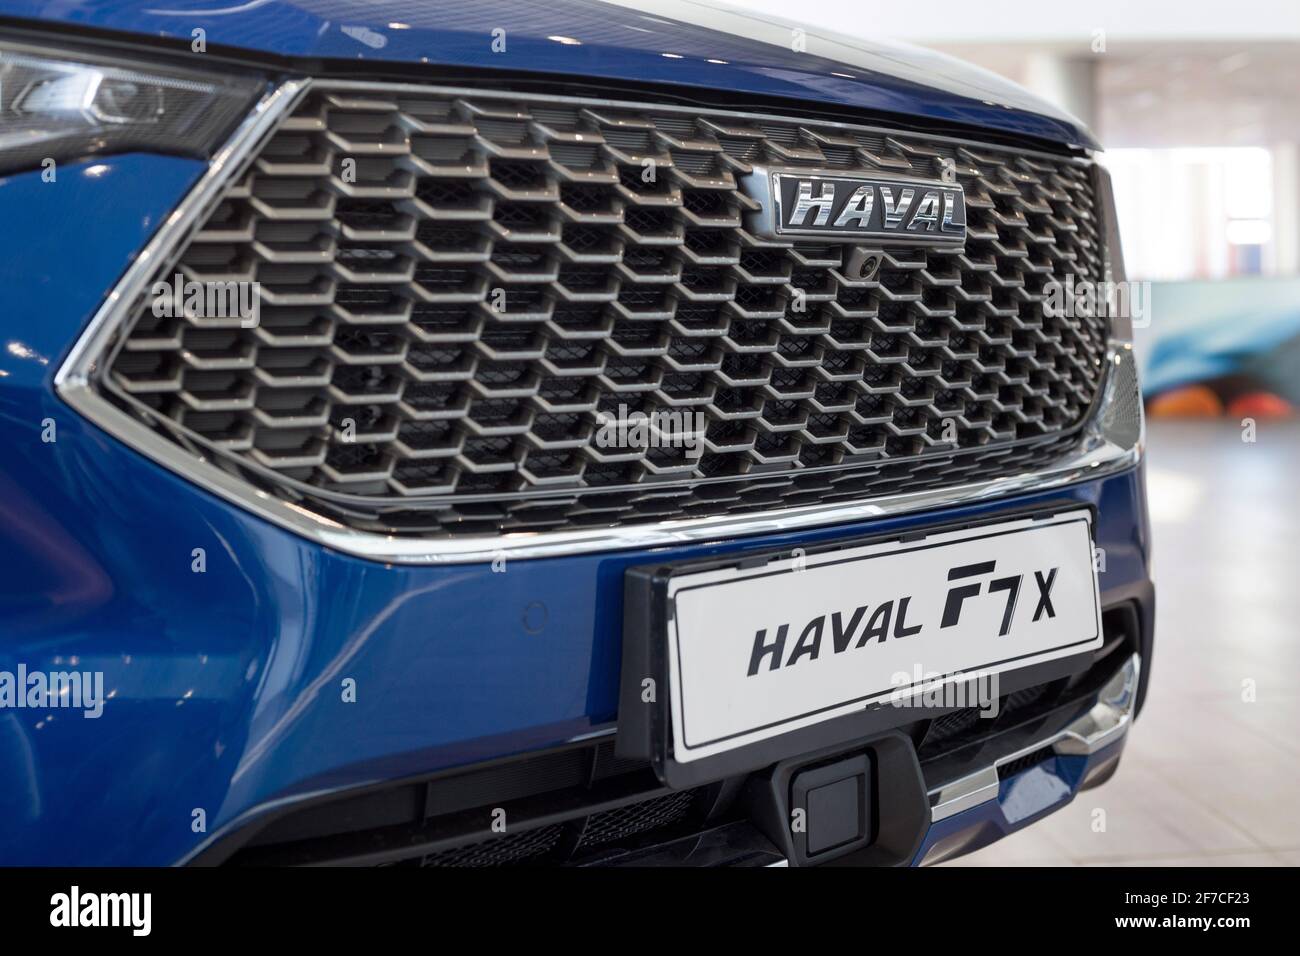 Russia, Izhevsk - February 17, 2021: Haval logo on a bumper of new car F7X at dealership showroom. Car manufacturer from China. Modern transportation. Stock Photo